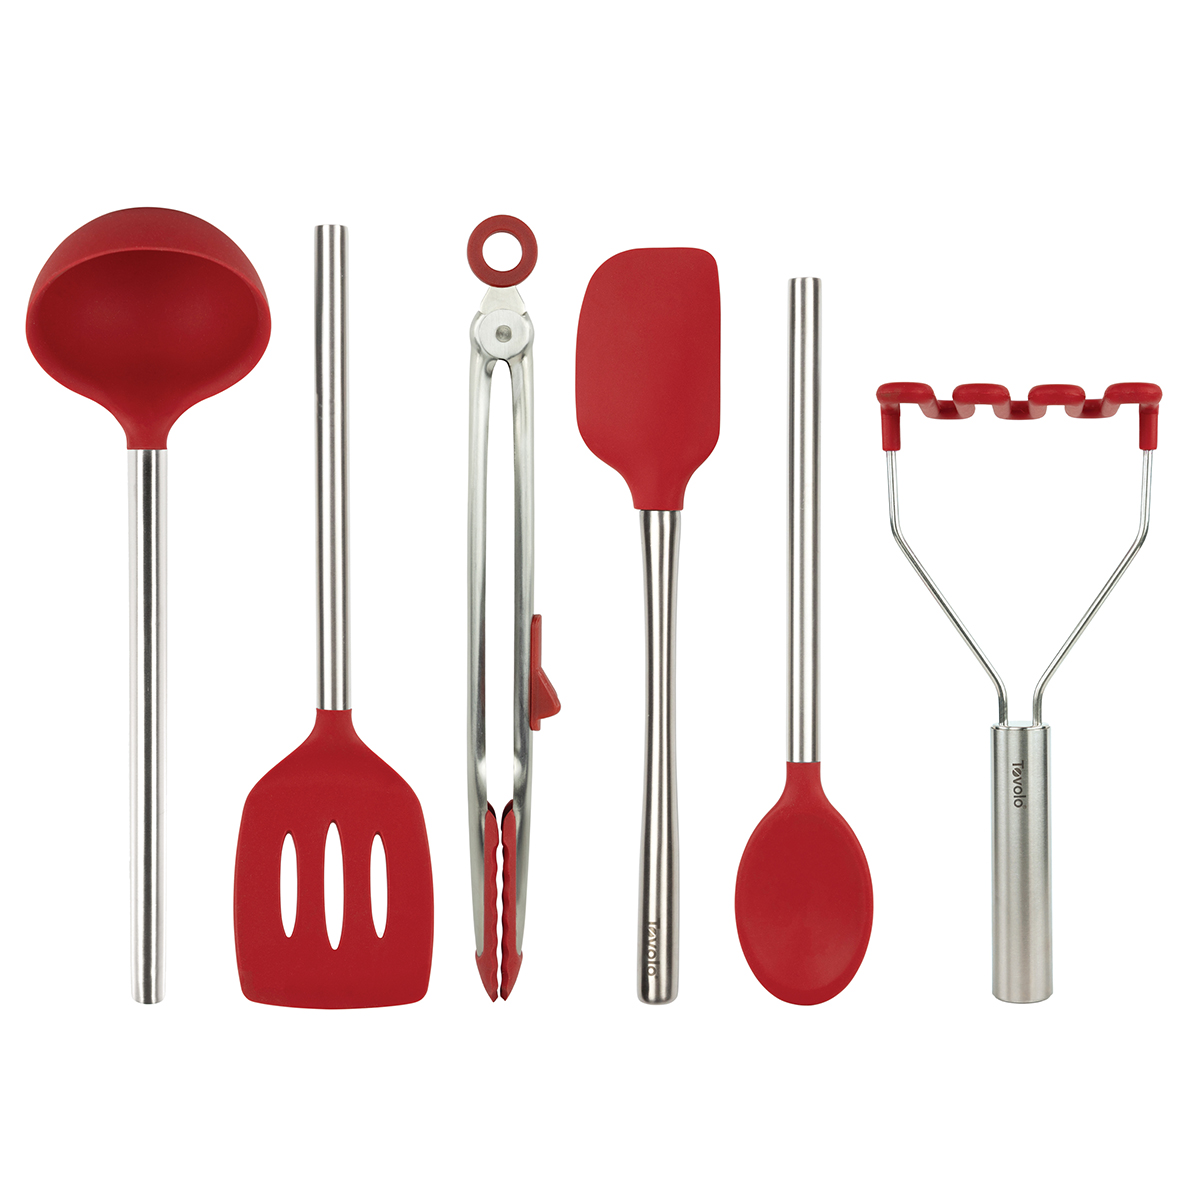 https://www.containerstore.com/catalogimages/514564/10098738_Silicone_Utensil_Set_Cayenn.jpg